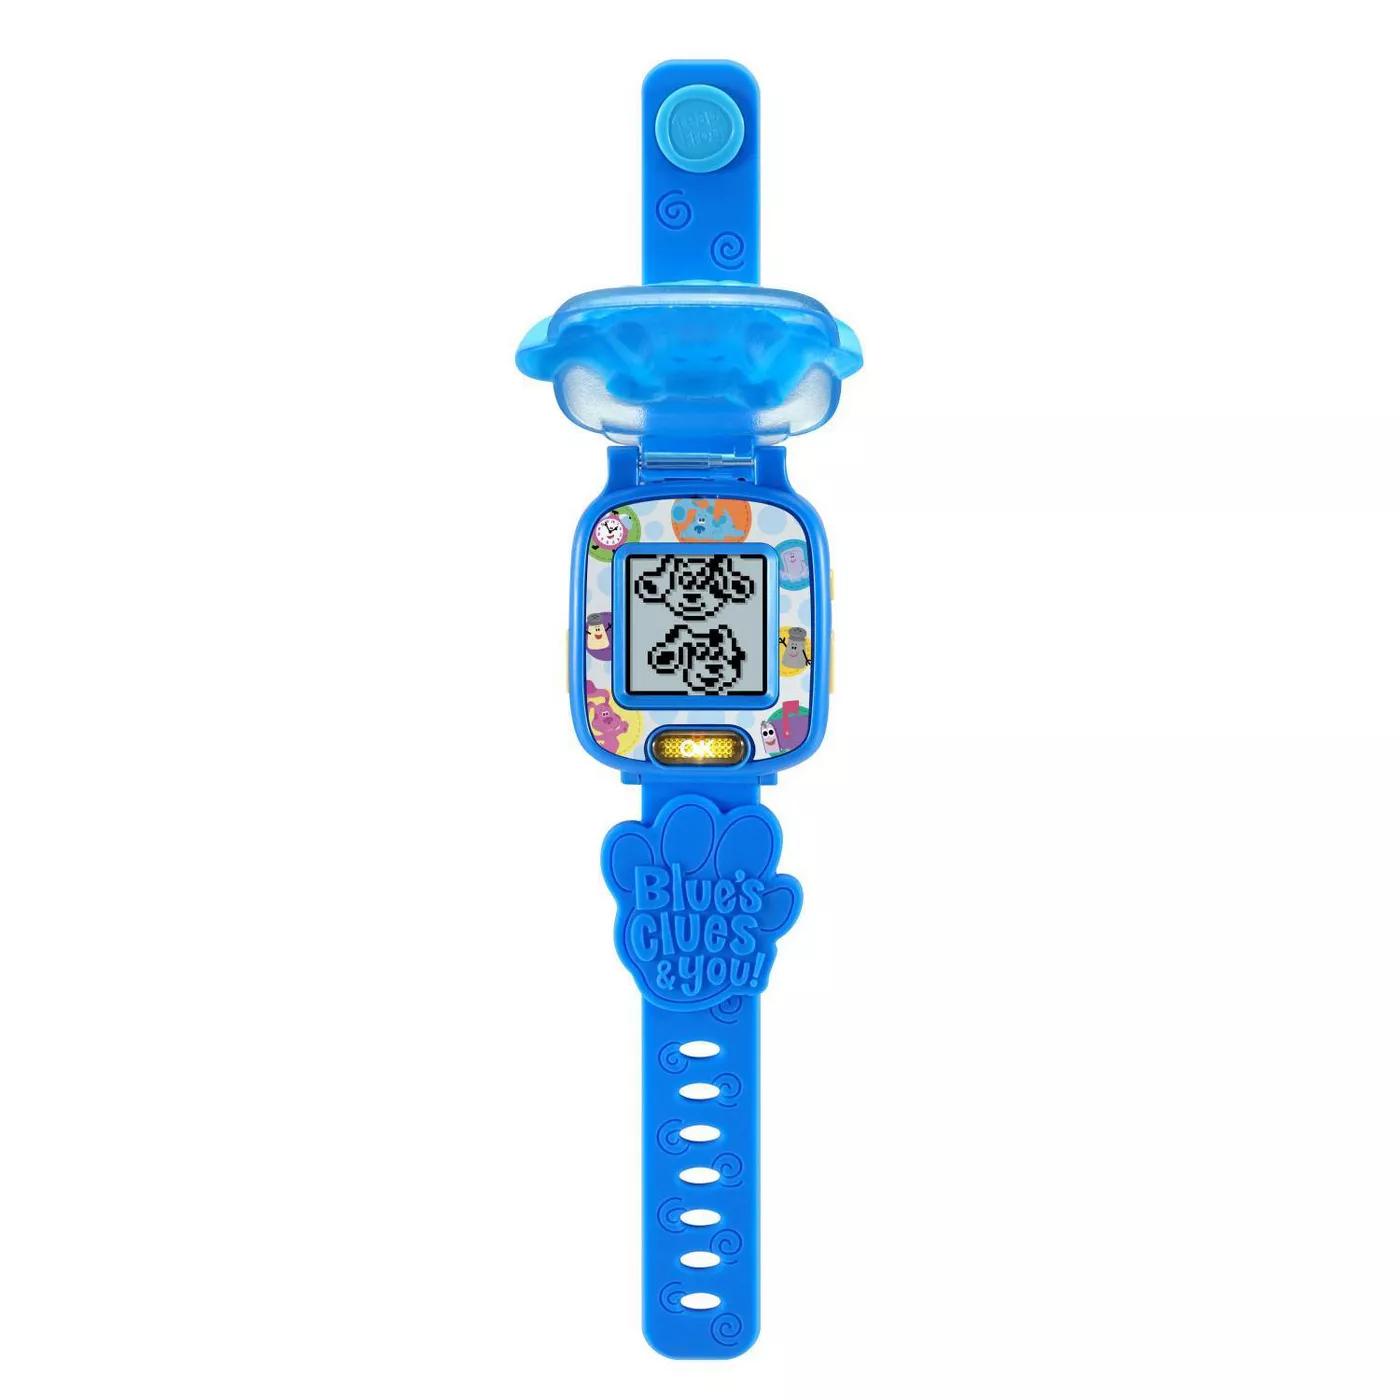 LeapFrog Blues Clues and You Blue Learning Watch for $5.34